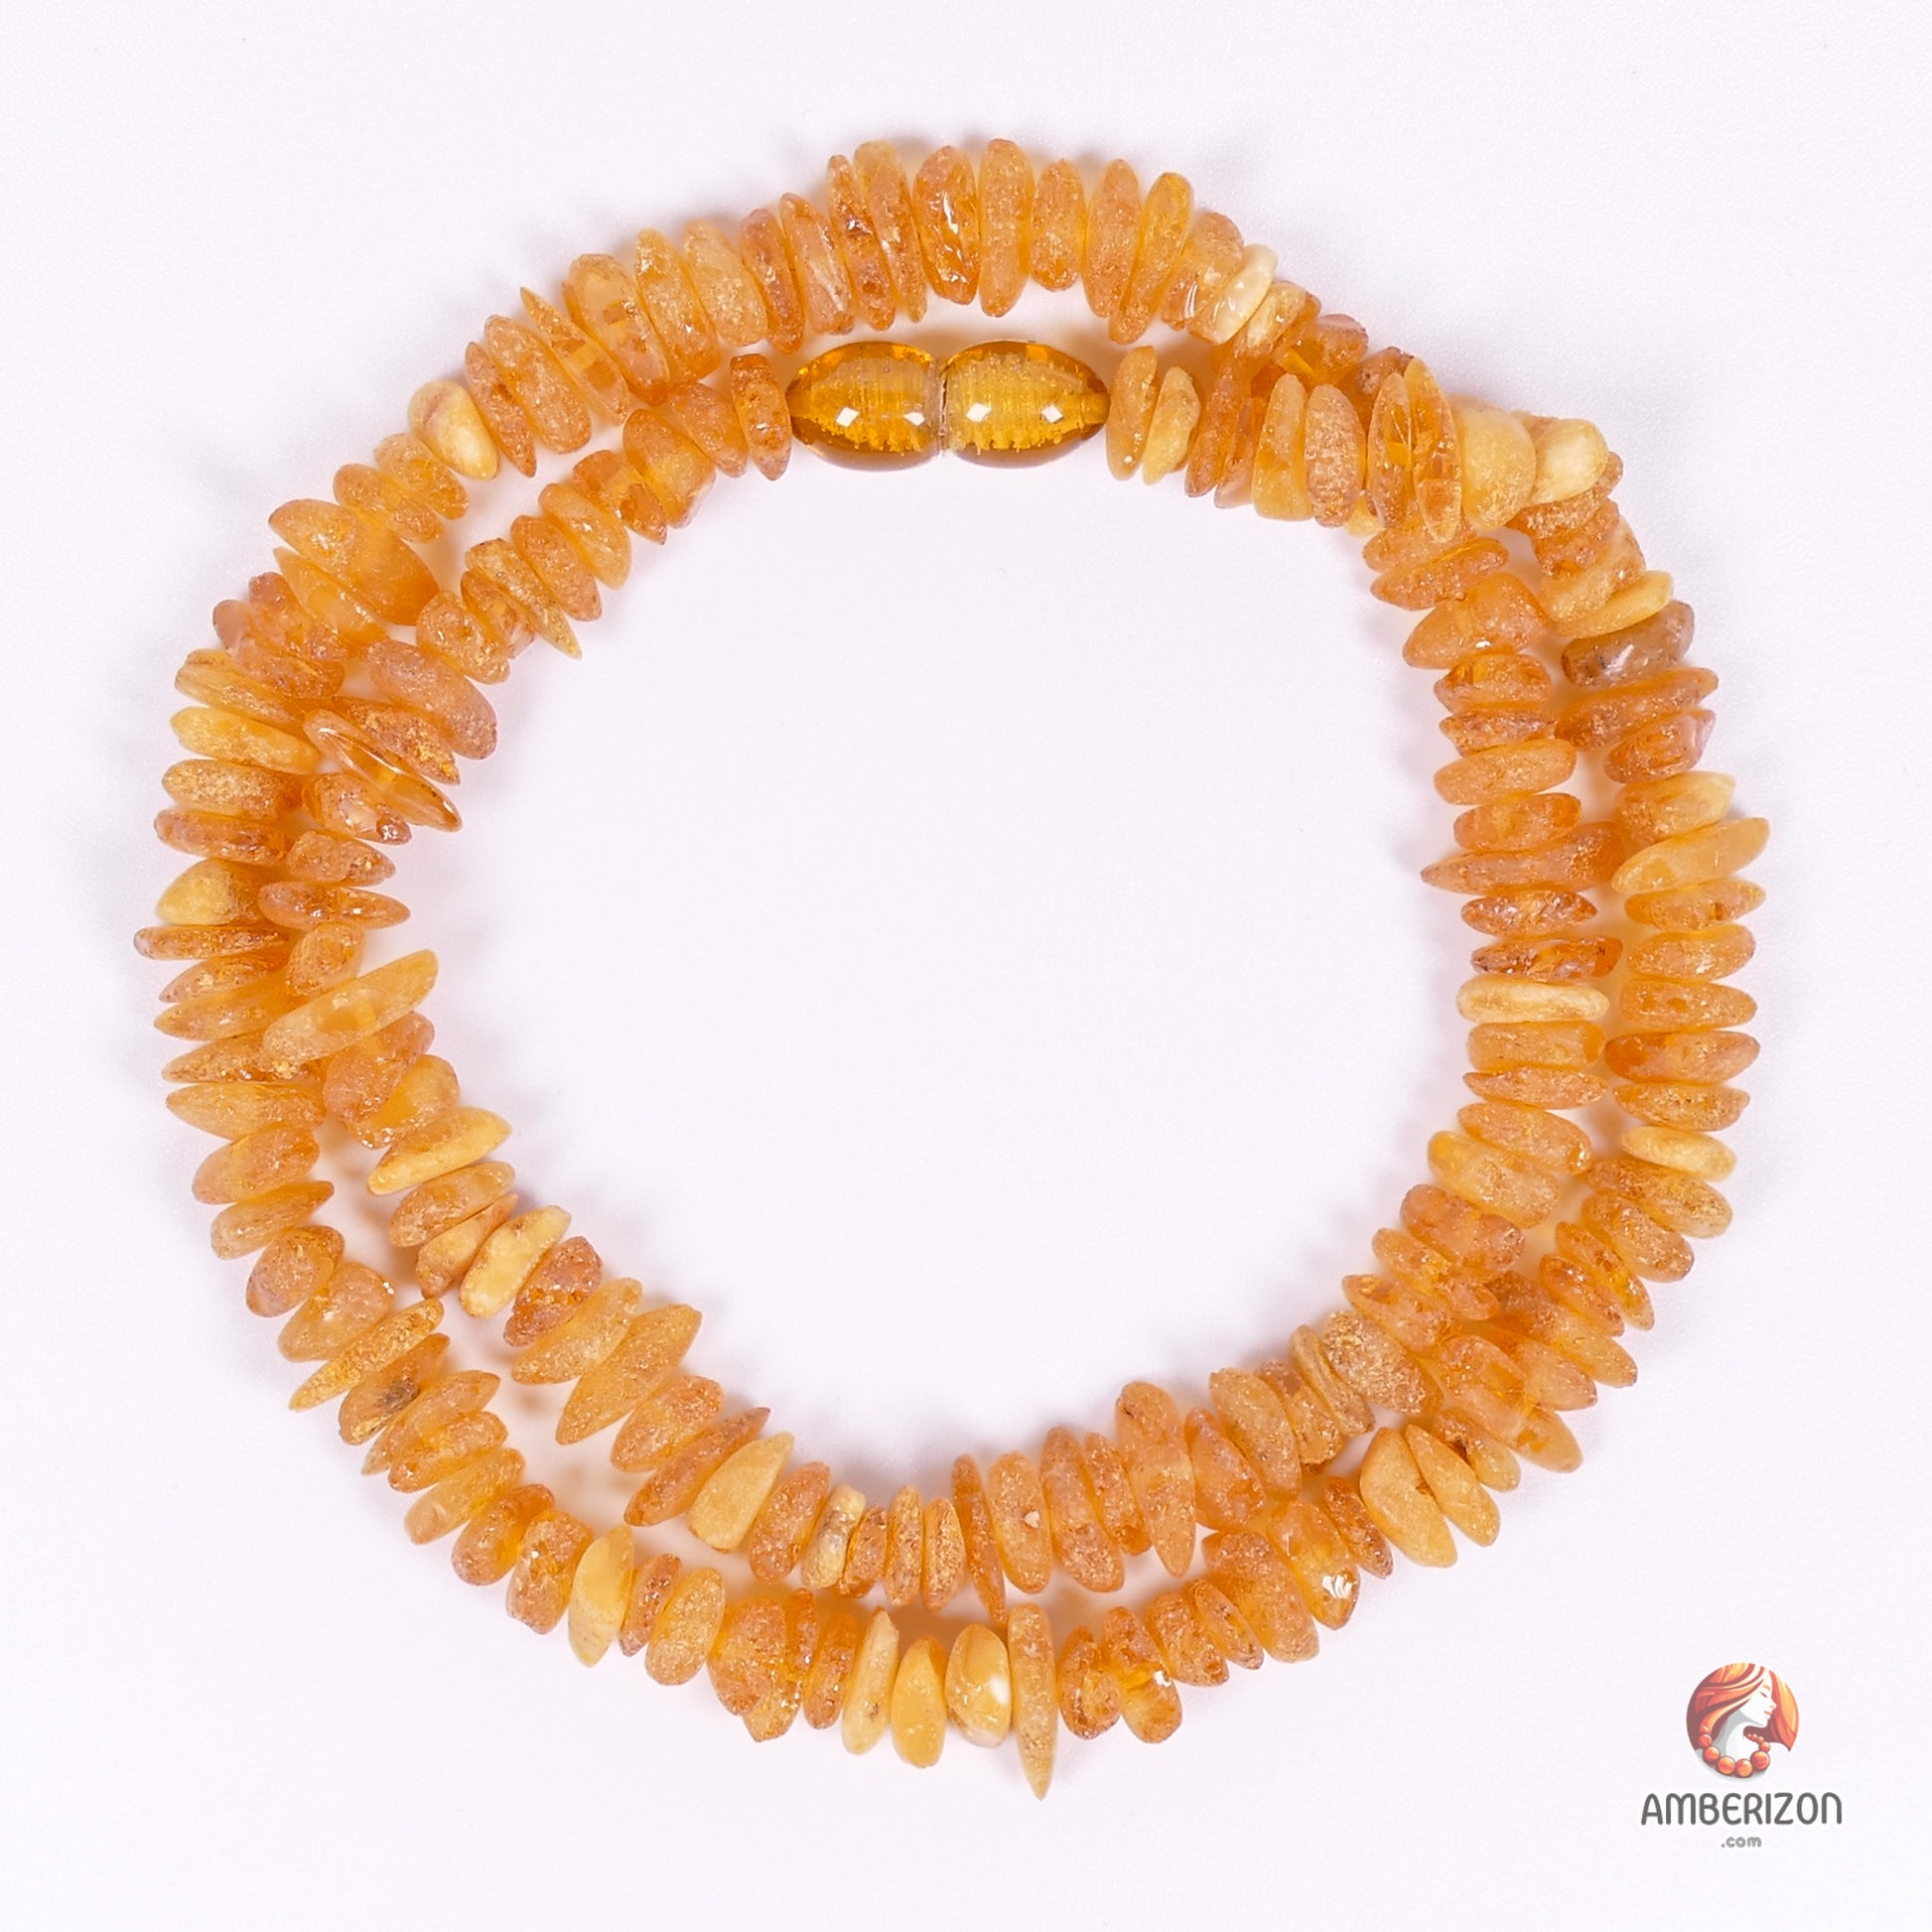 Women's necklace - Raw unpolished amber chip beads honey color